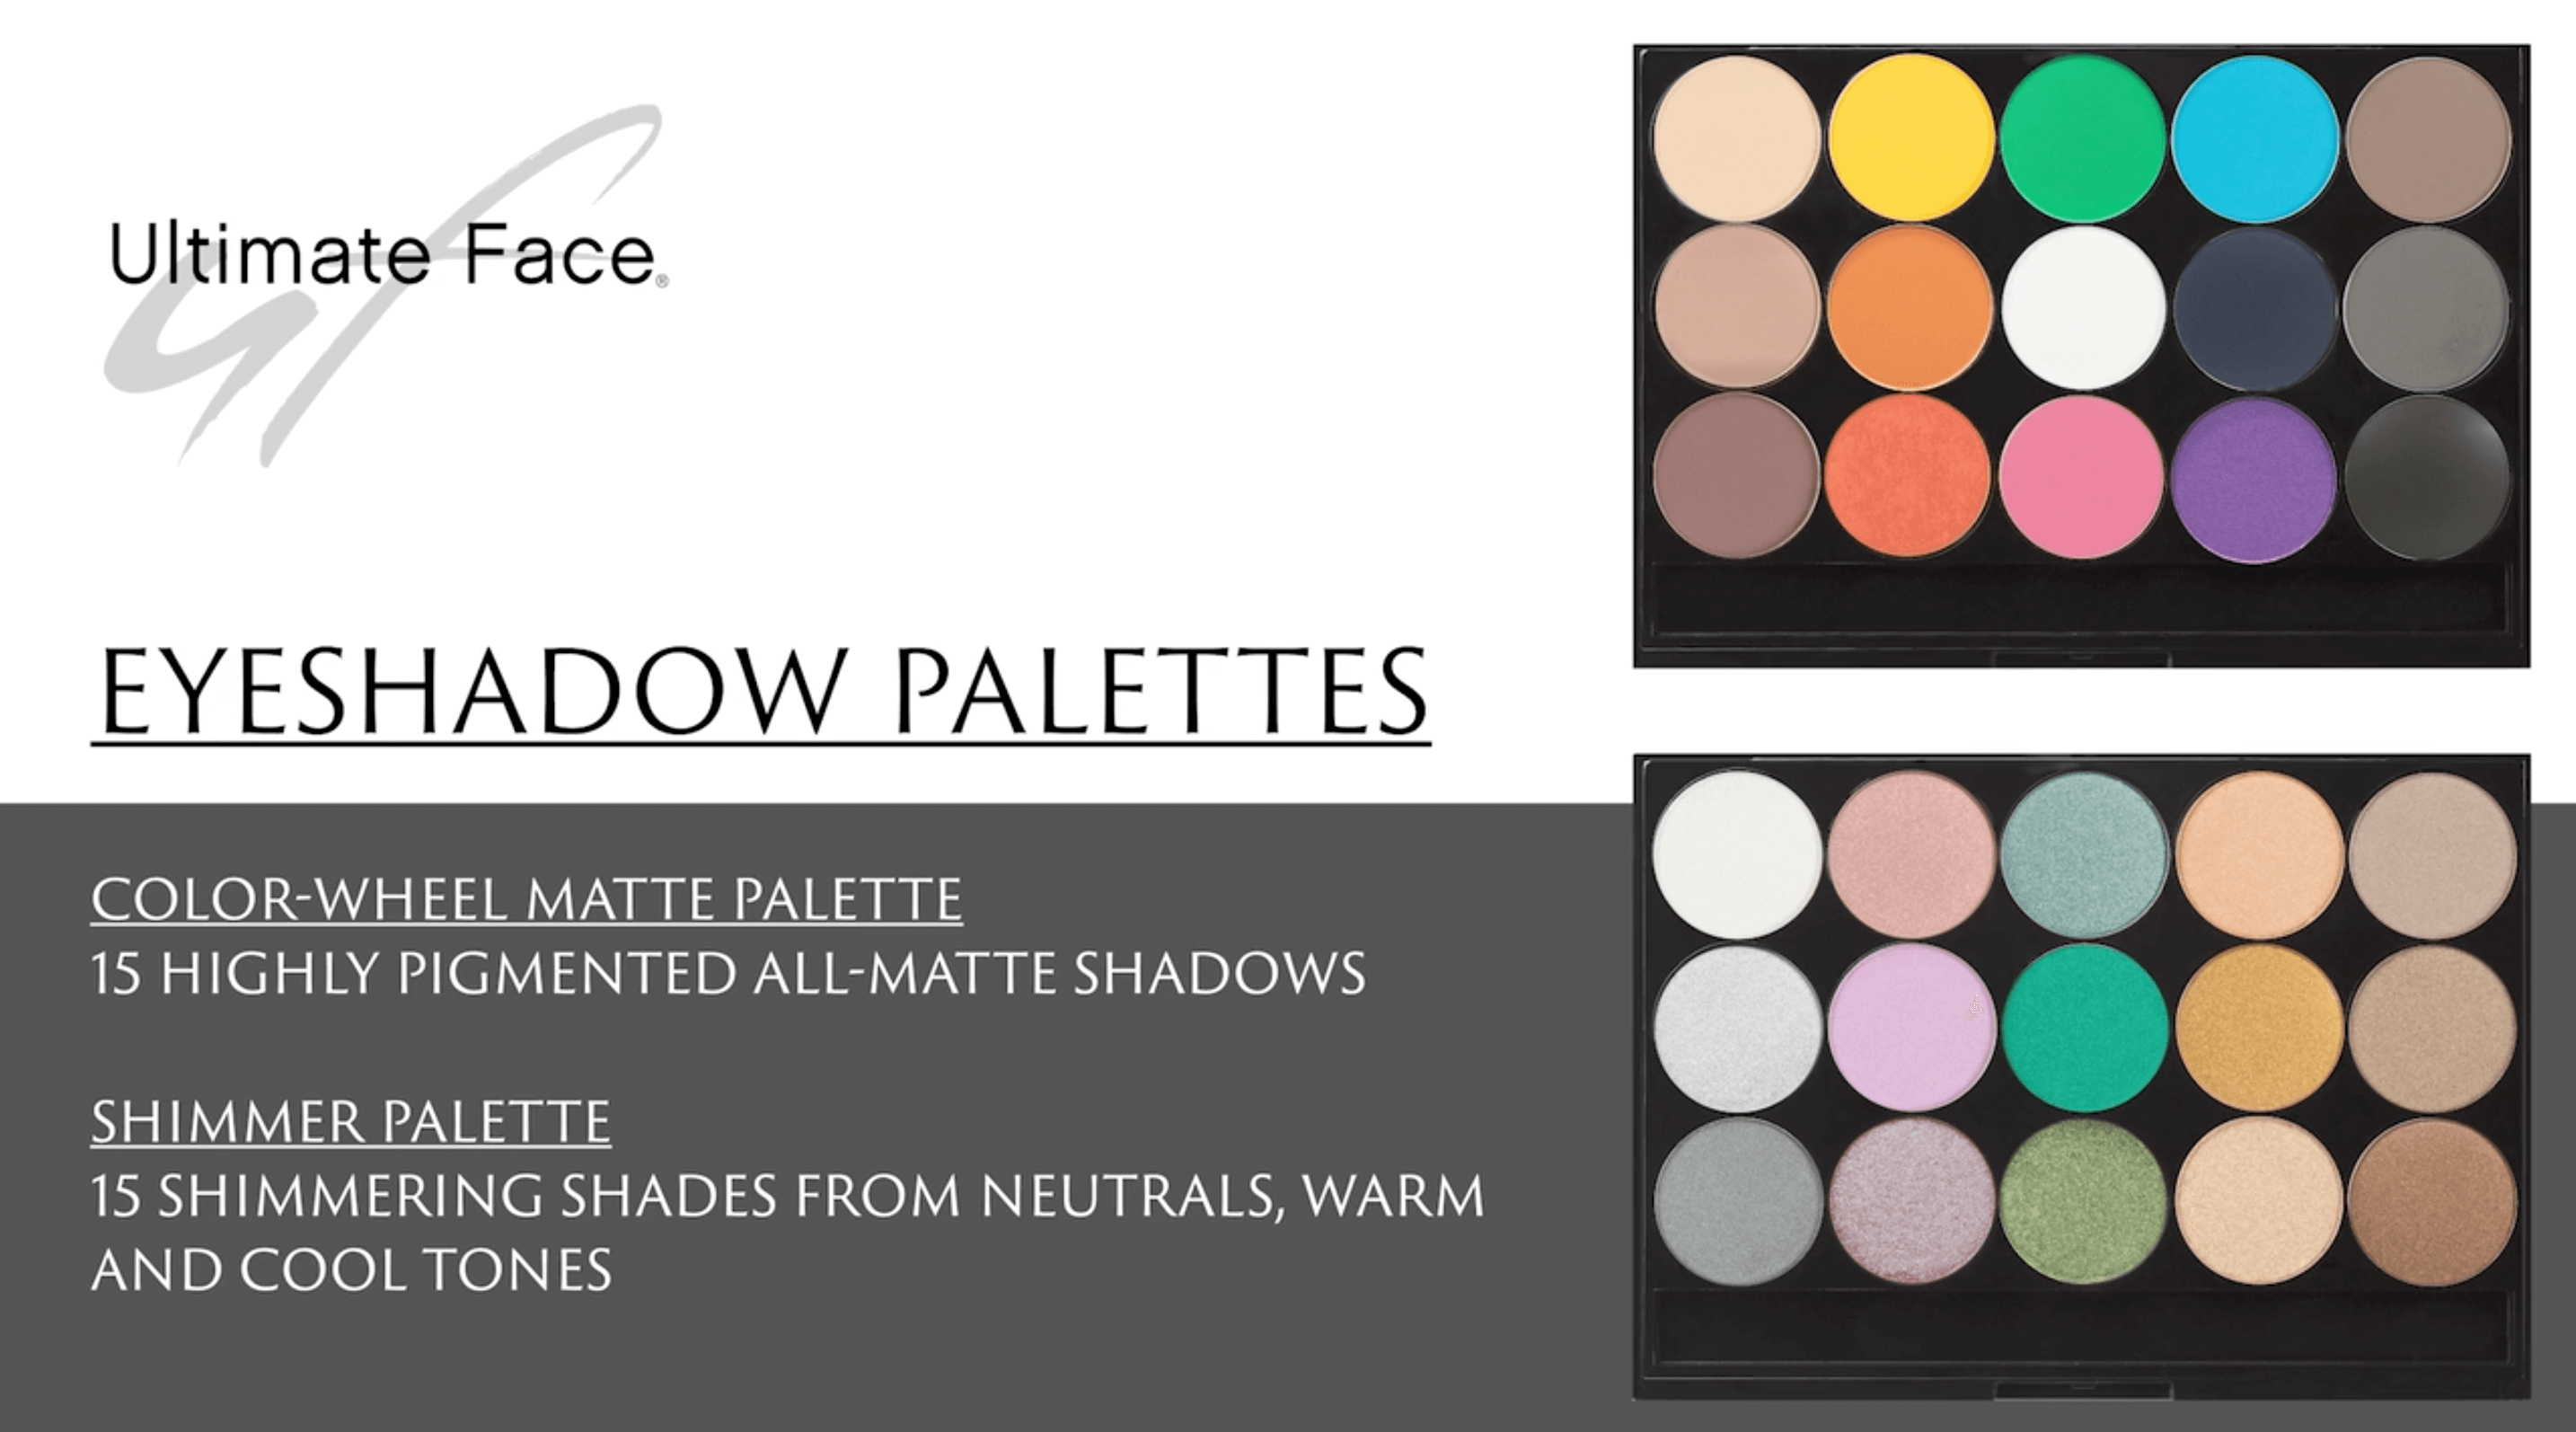 Ultimate Face Pro Shadow Palettes